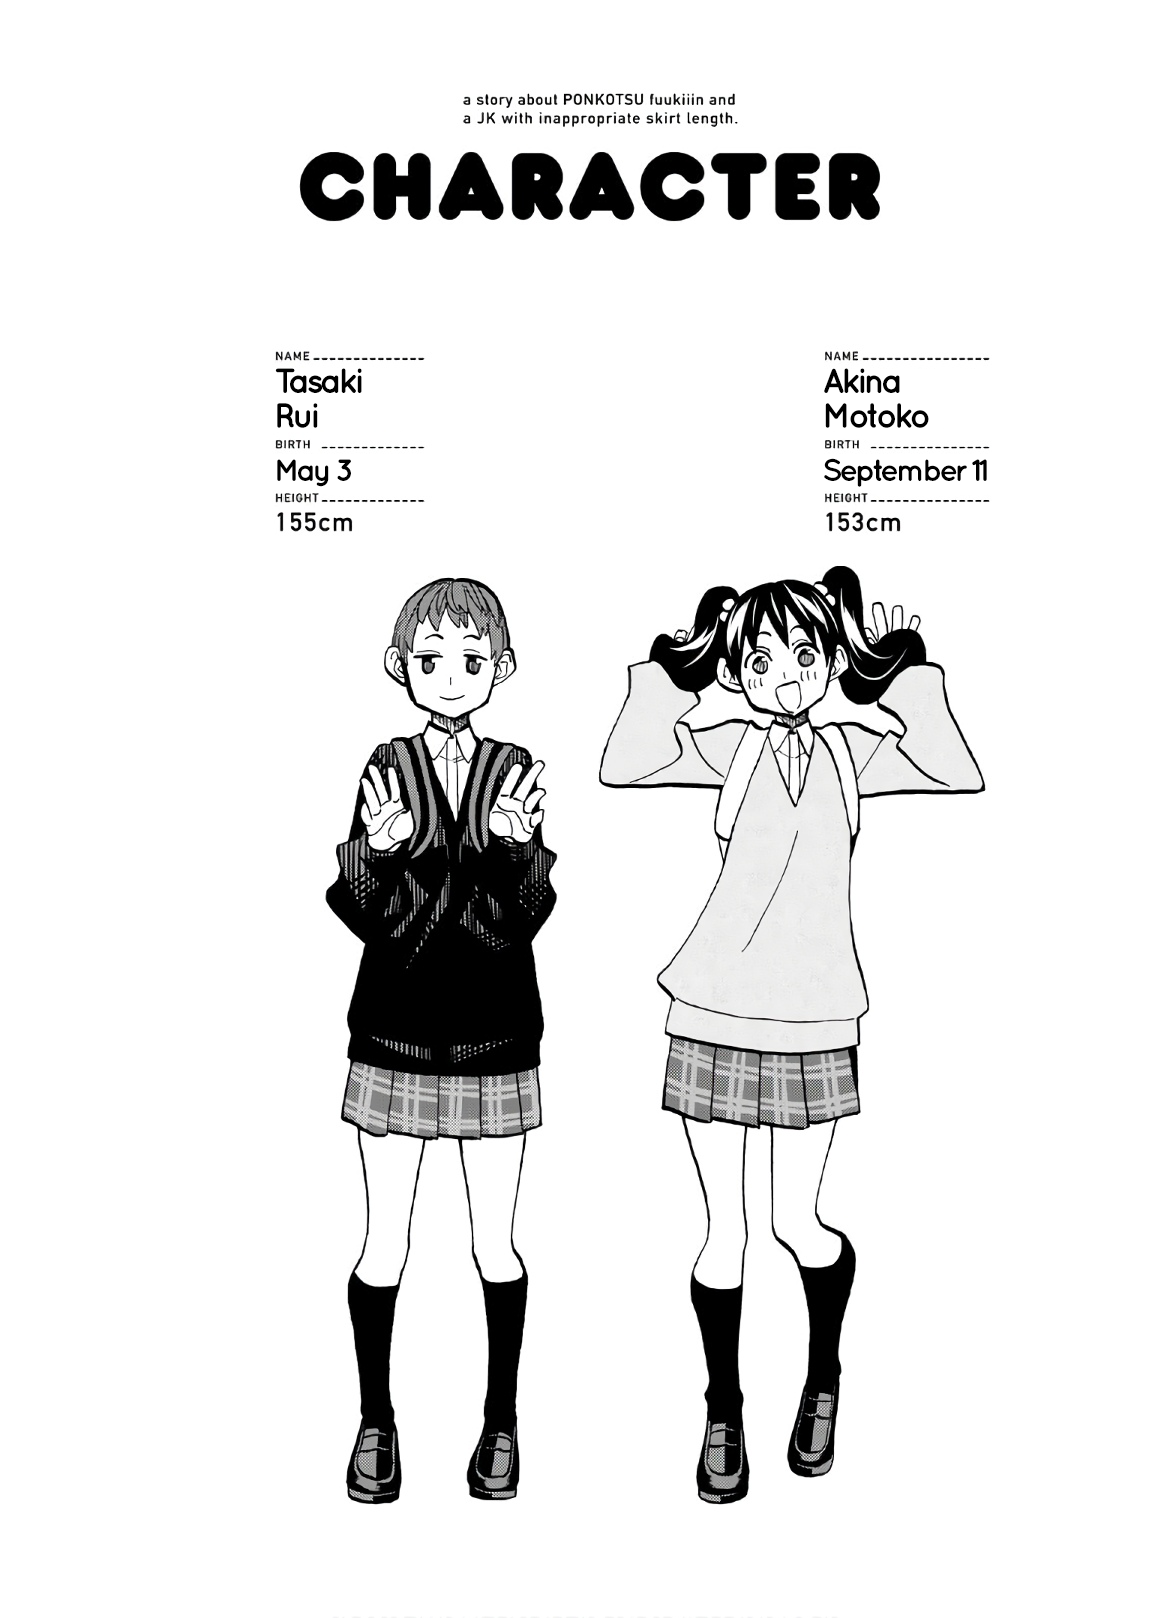 The Story Between a Dumb Prefect and a High School Girl with an Inappropriate Skirt Lengt Chapter 6.5